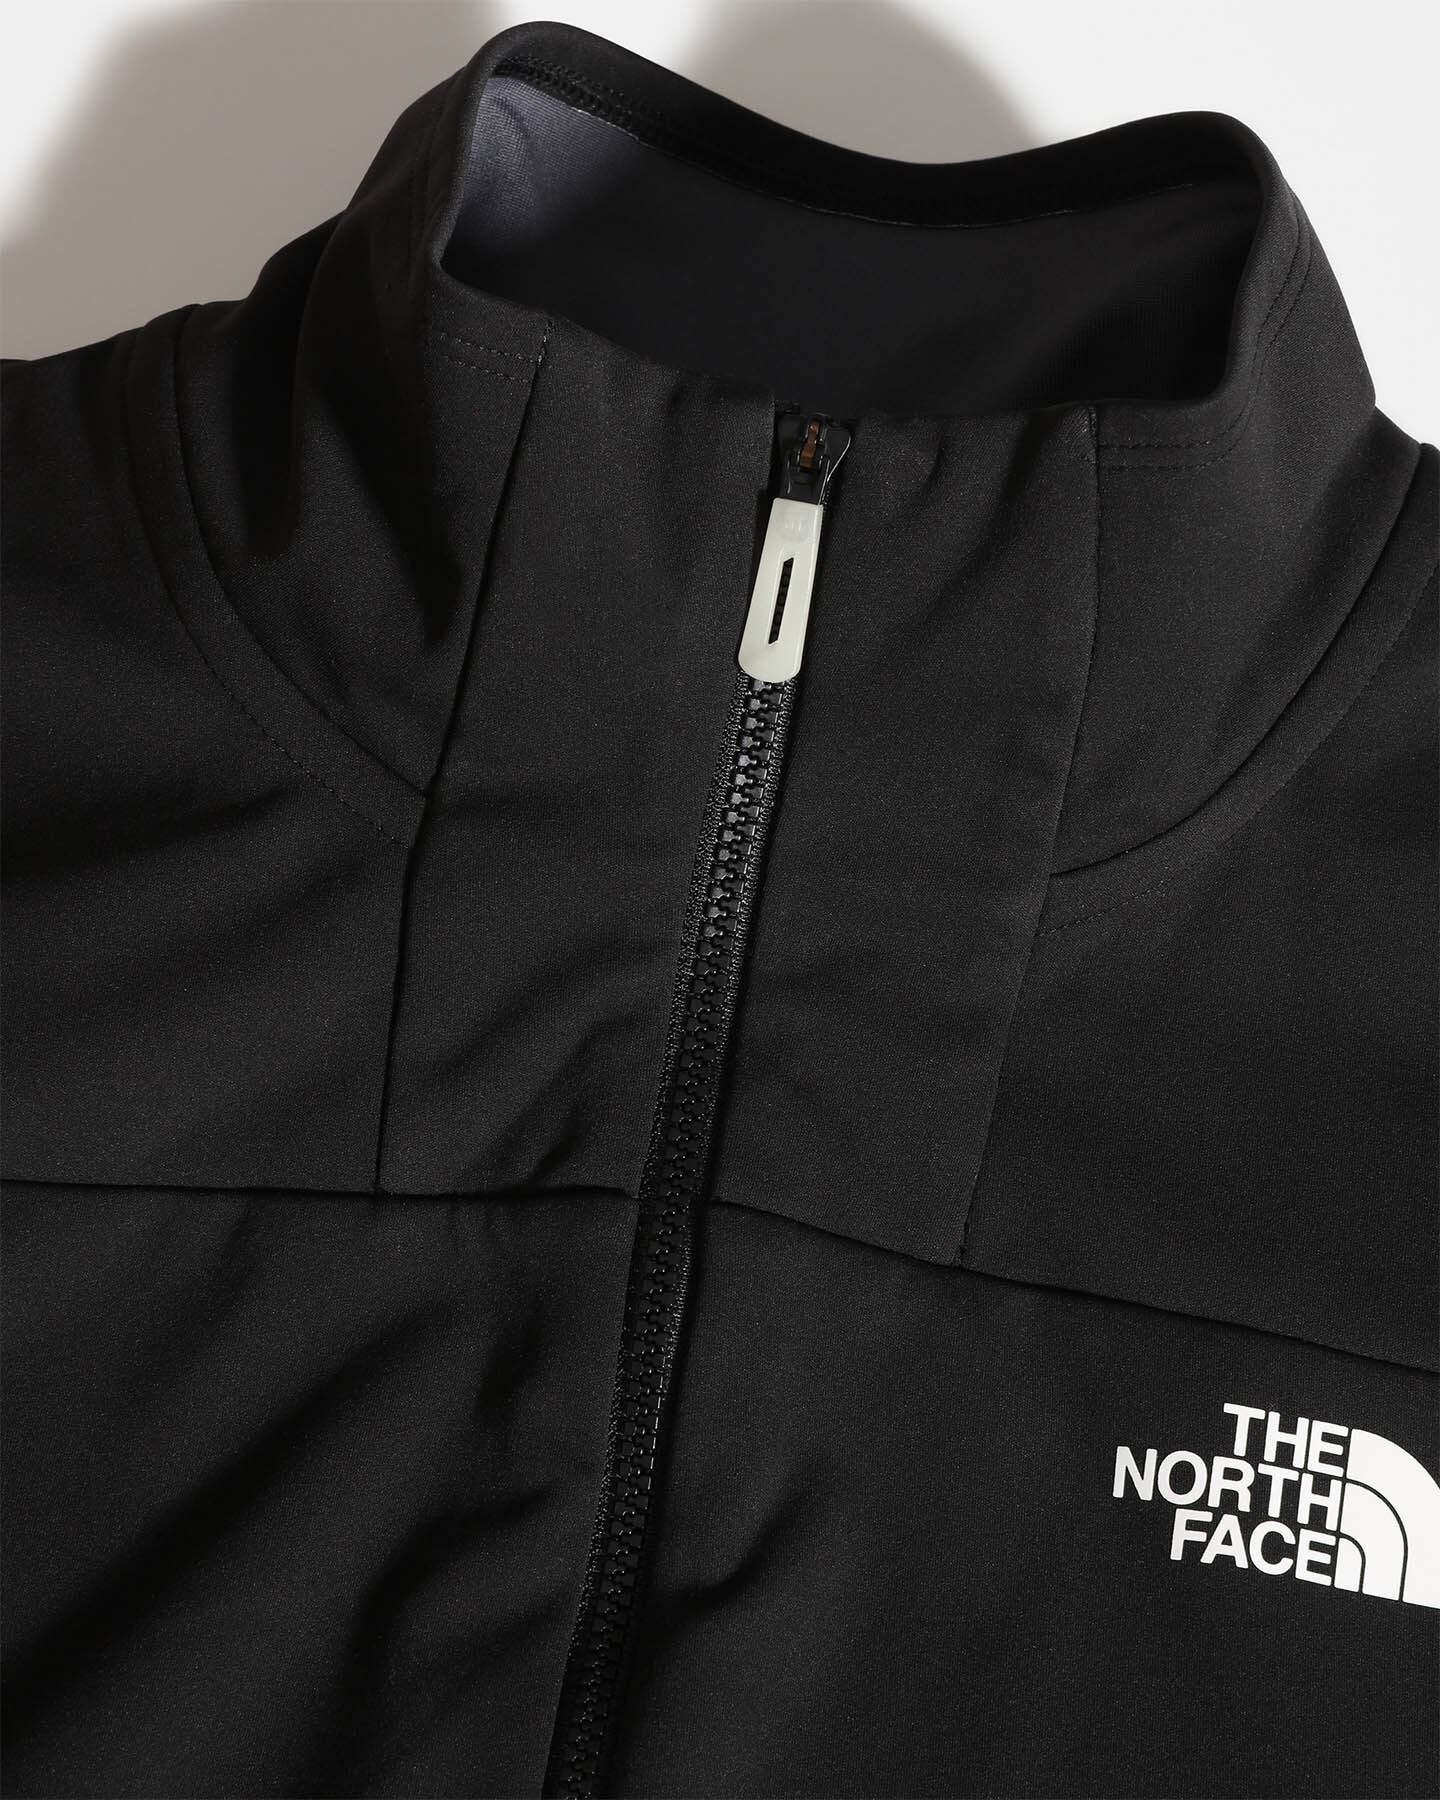  Pile THE NORTH FACE SPEEDTOUR STRETCH W S5243531|NY7|XS scatto 3